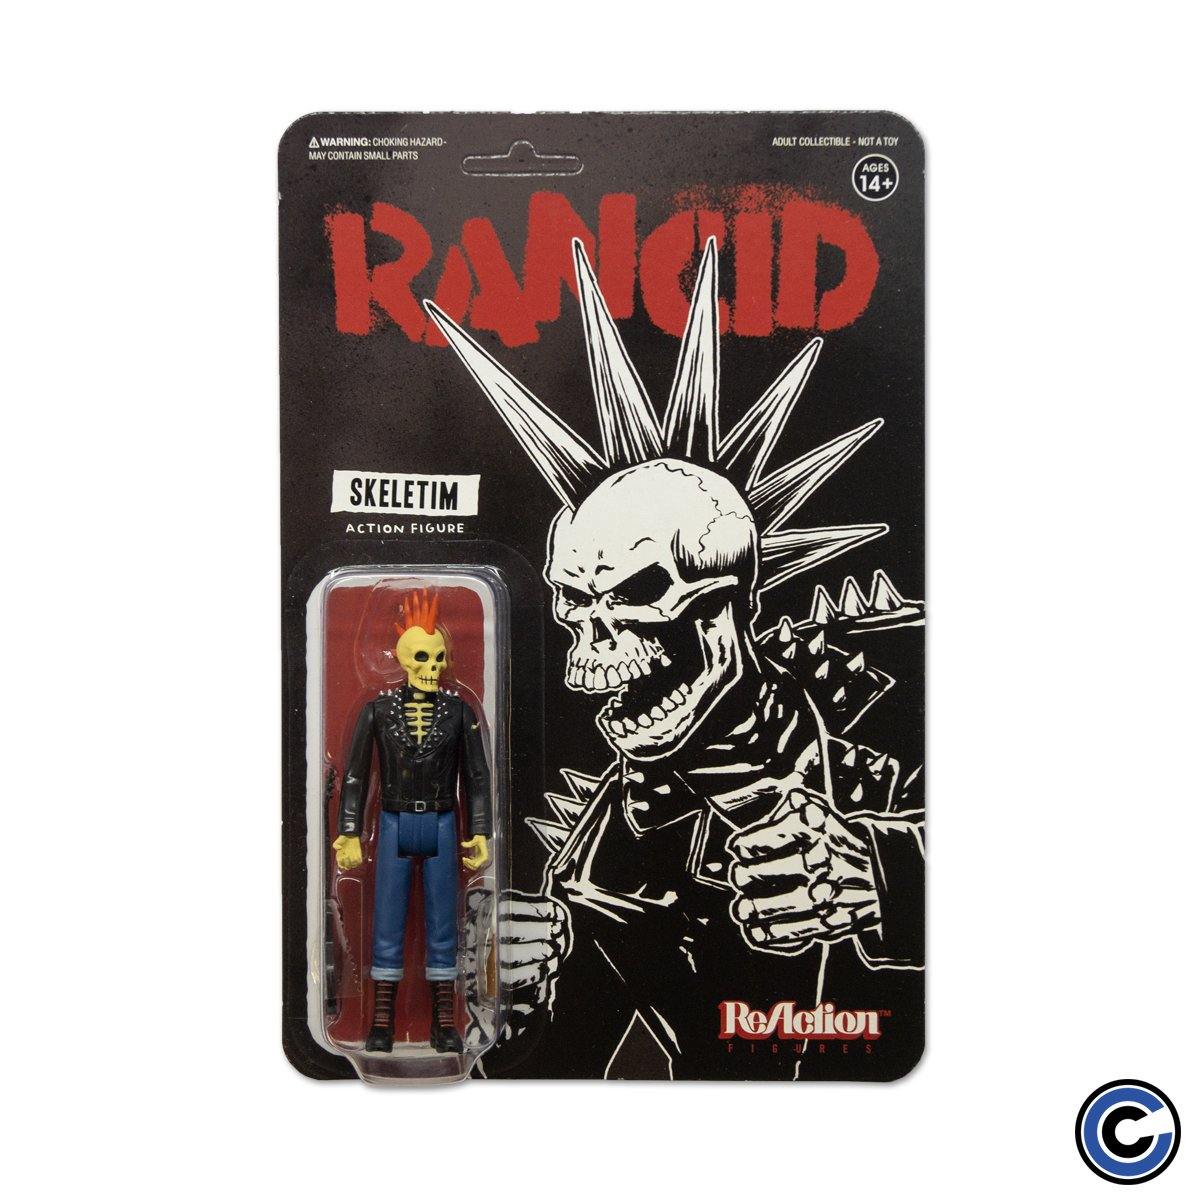 Buy – Rancid "Skeletim" Action Figure – Band & Music Merch – Cold Cuts Merch